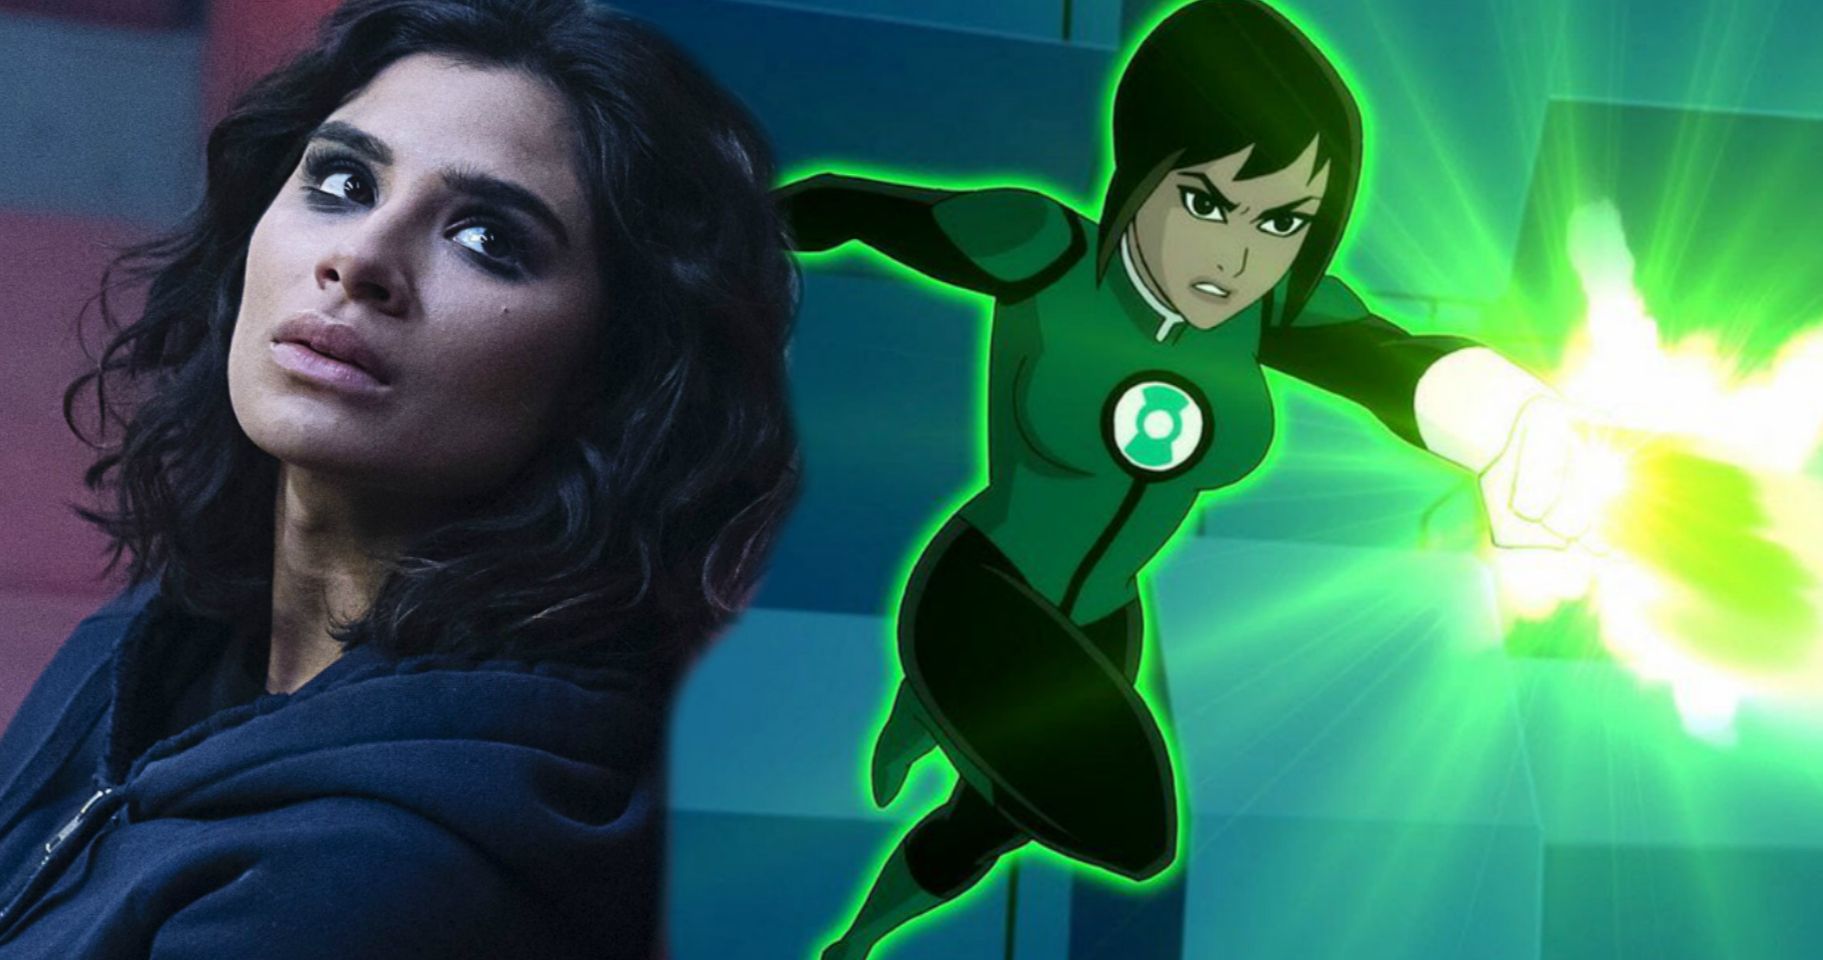 Doom Patrol Star Wants to Take on Jessica Cruz in a Live-Action Green Lantern Project